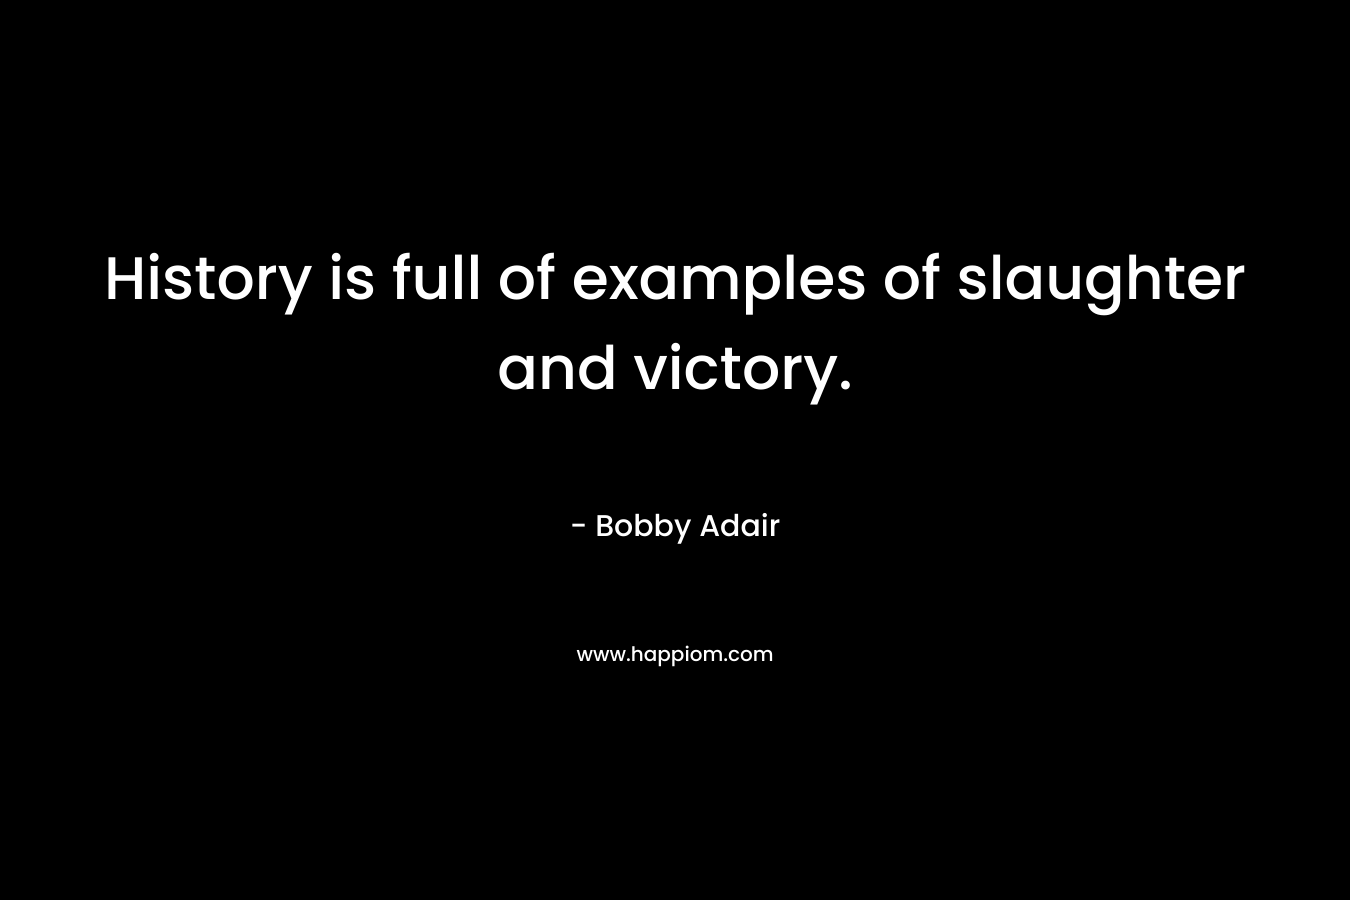 History is full of examples of slaughter and victory. – Bobby Adair